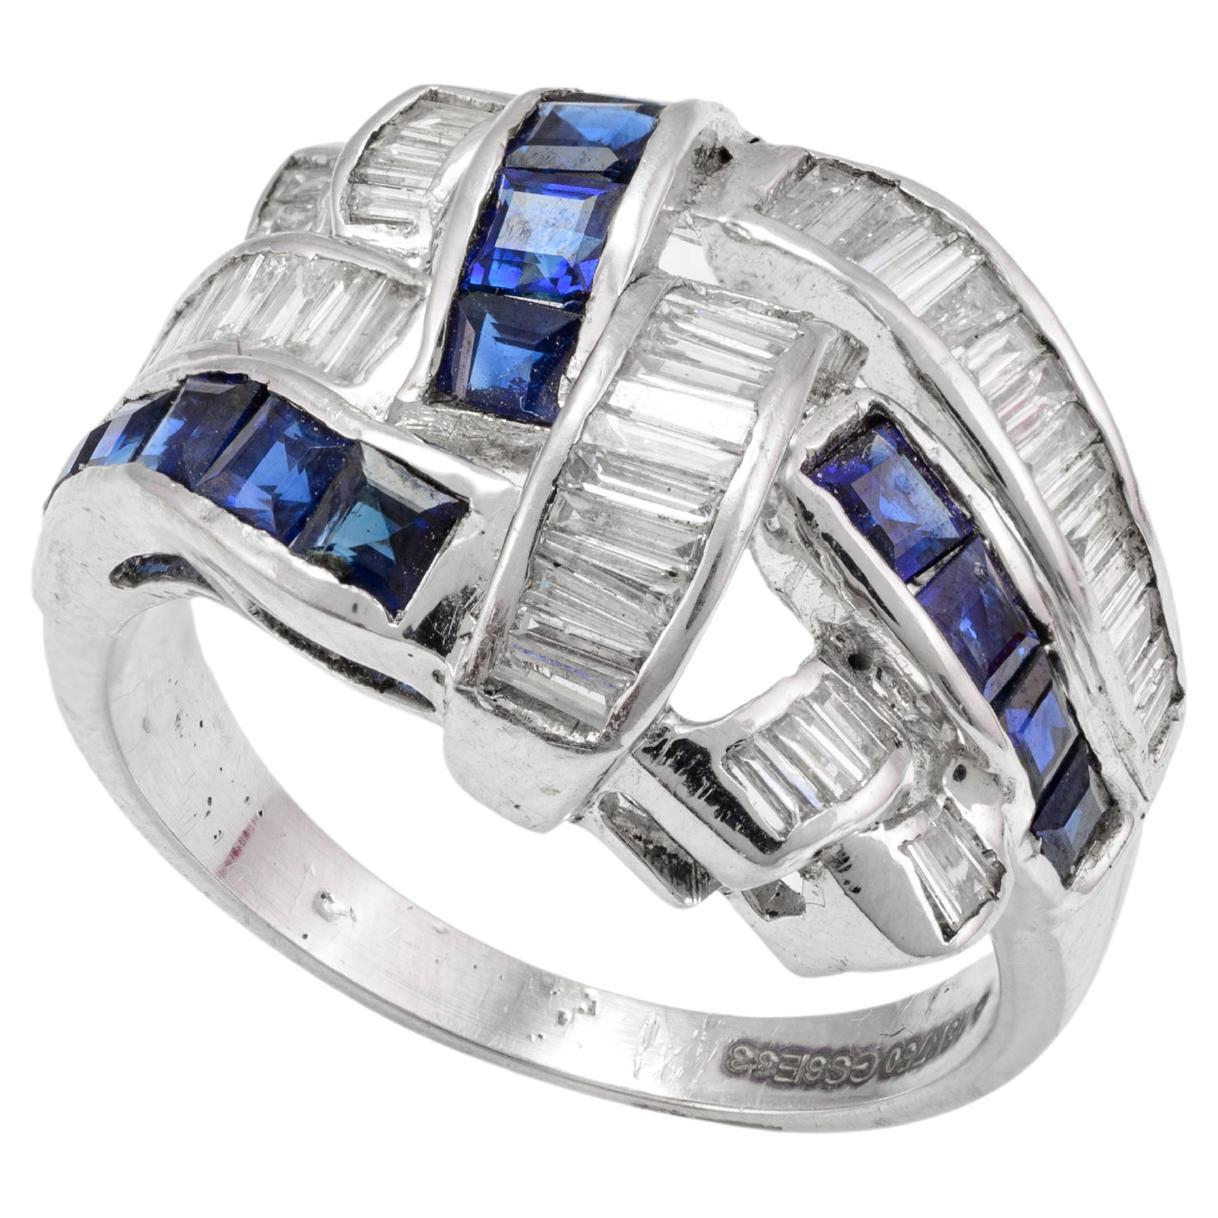 For Sale:  Art Deco 1.3 Carat Blue Sapphire and Diamond Ring in 18k Solid White Gold